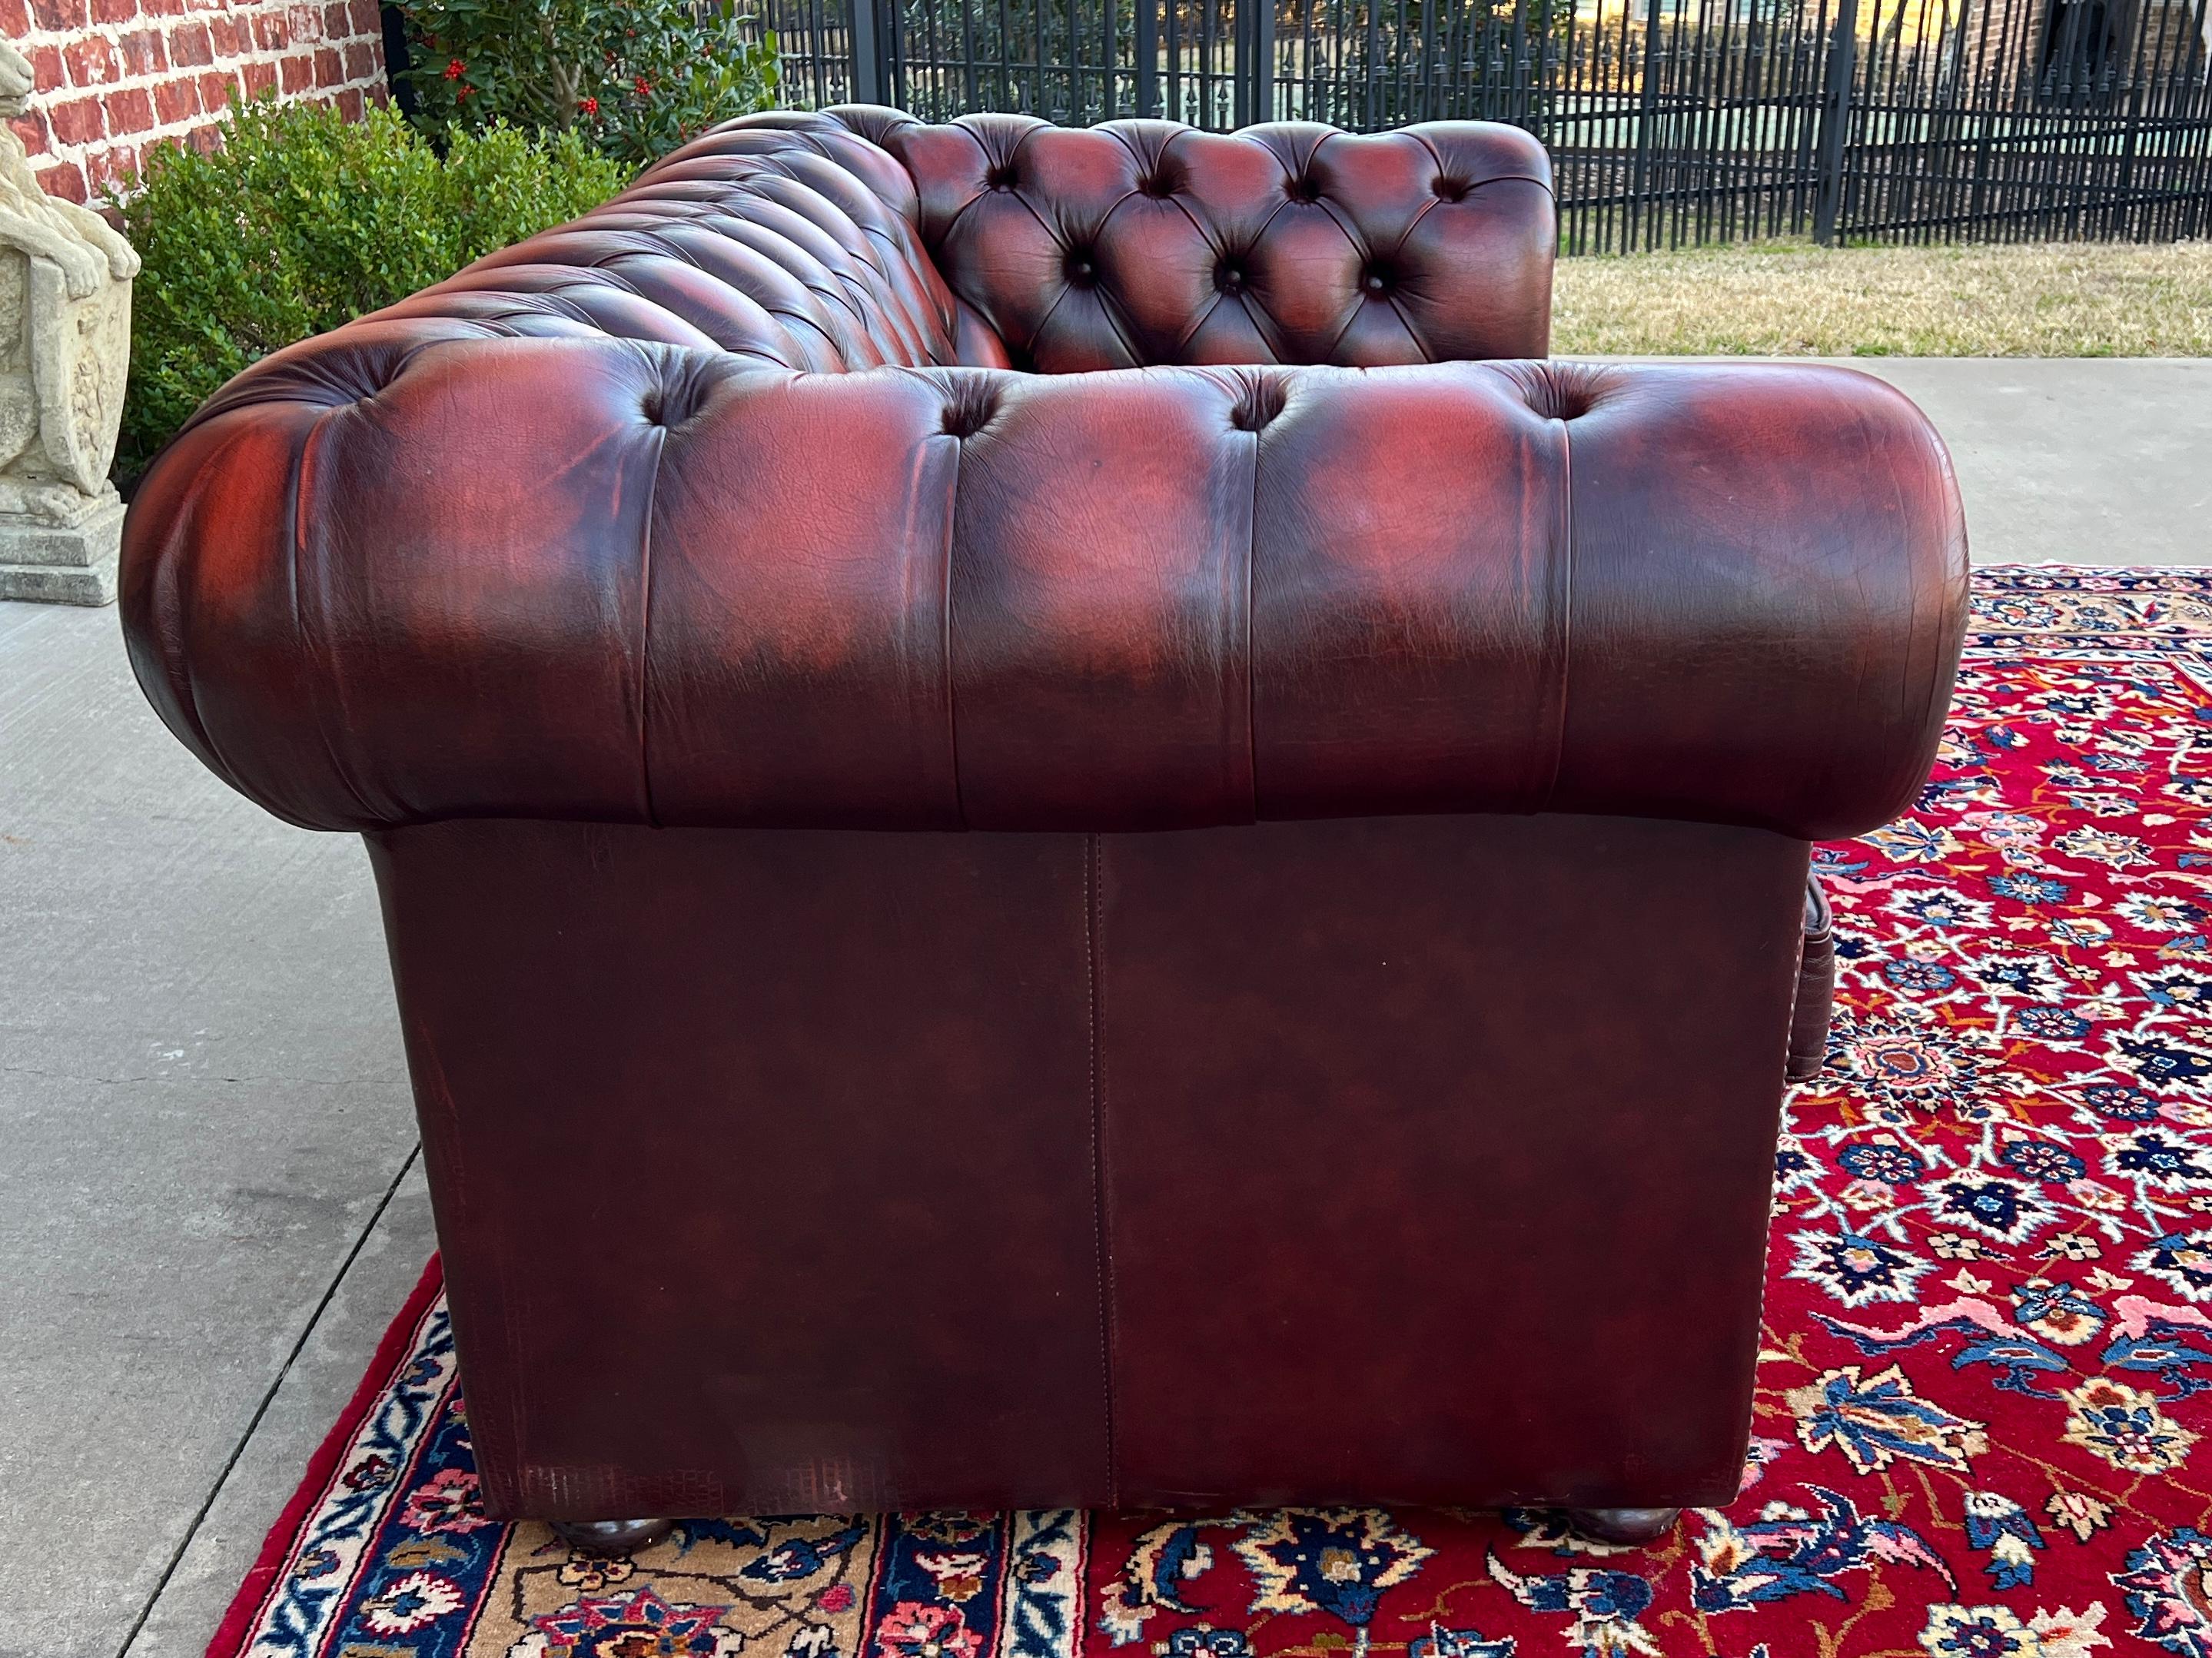 Vintage English Chesterfield Leather Tufted Love Seat Sofa Oxblood Red #1 For Sale 5